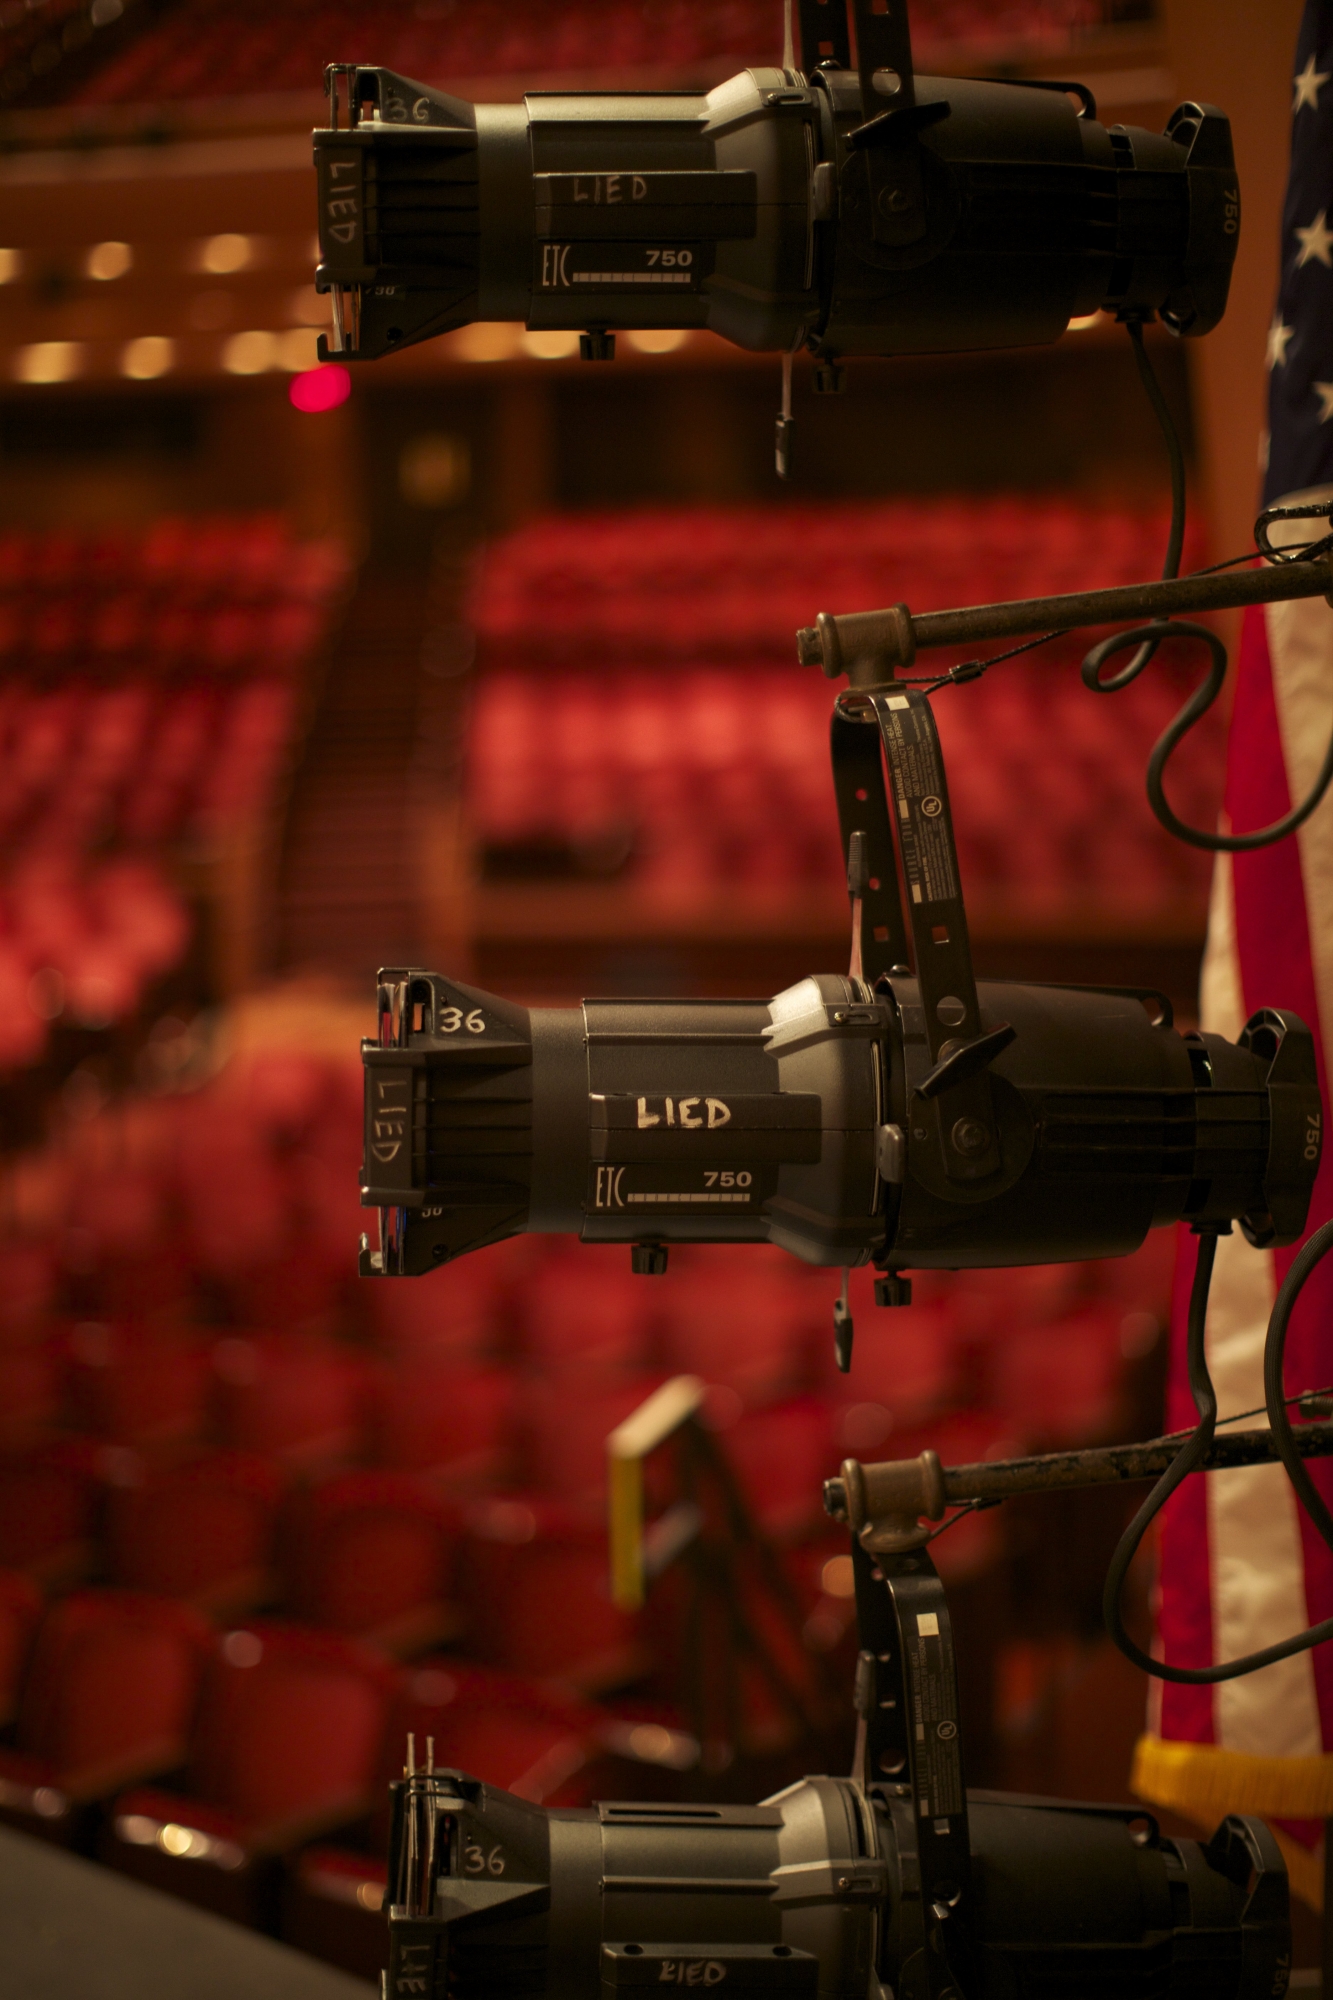 Image of a stage light in the foreground and the iconic red seats of the Lied Center visible in the background